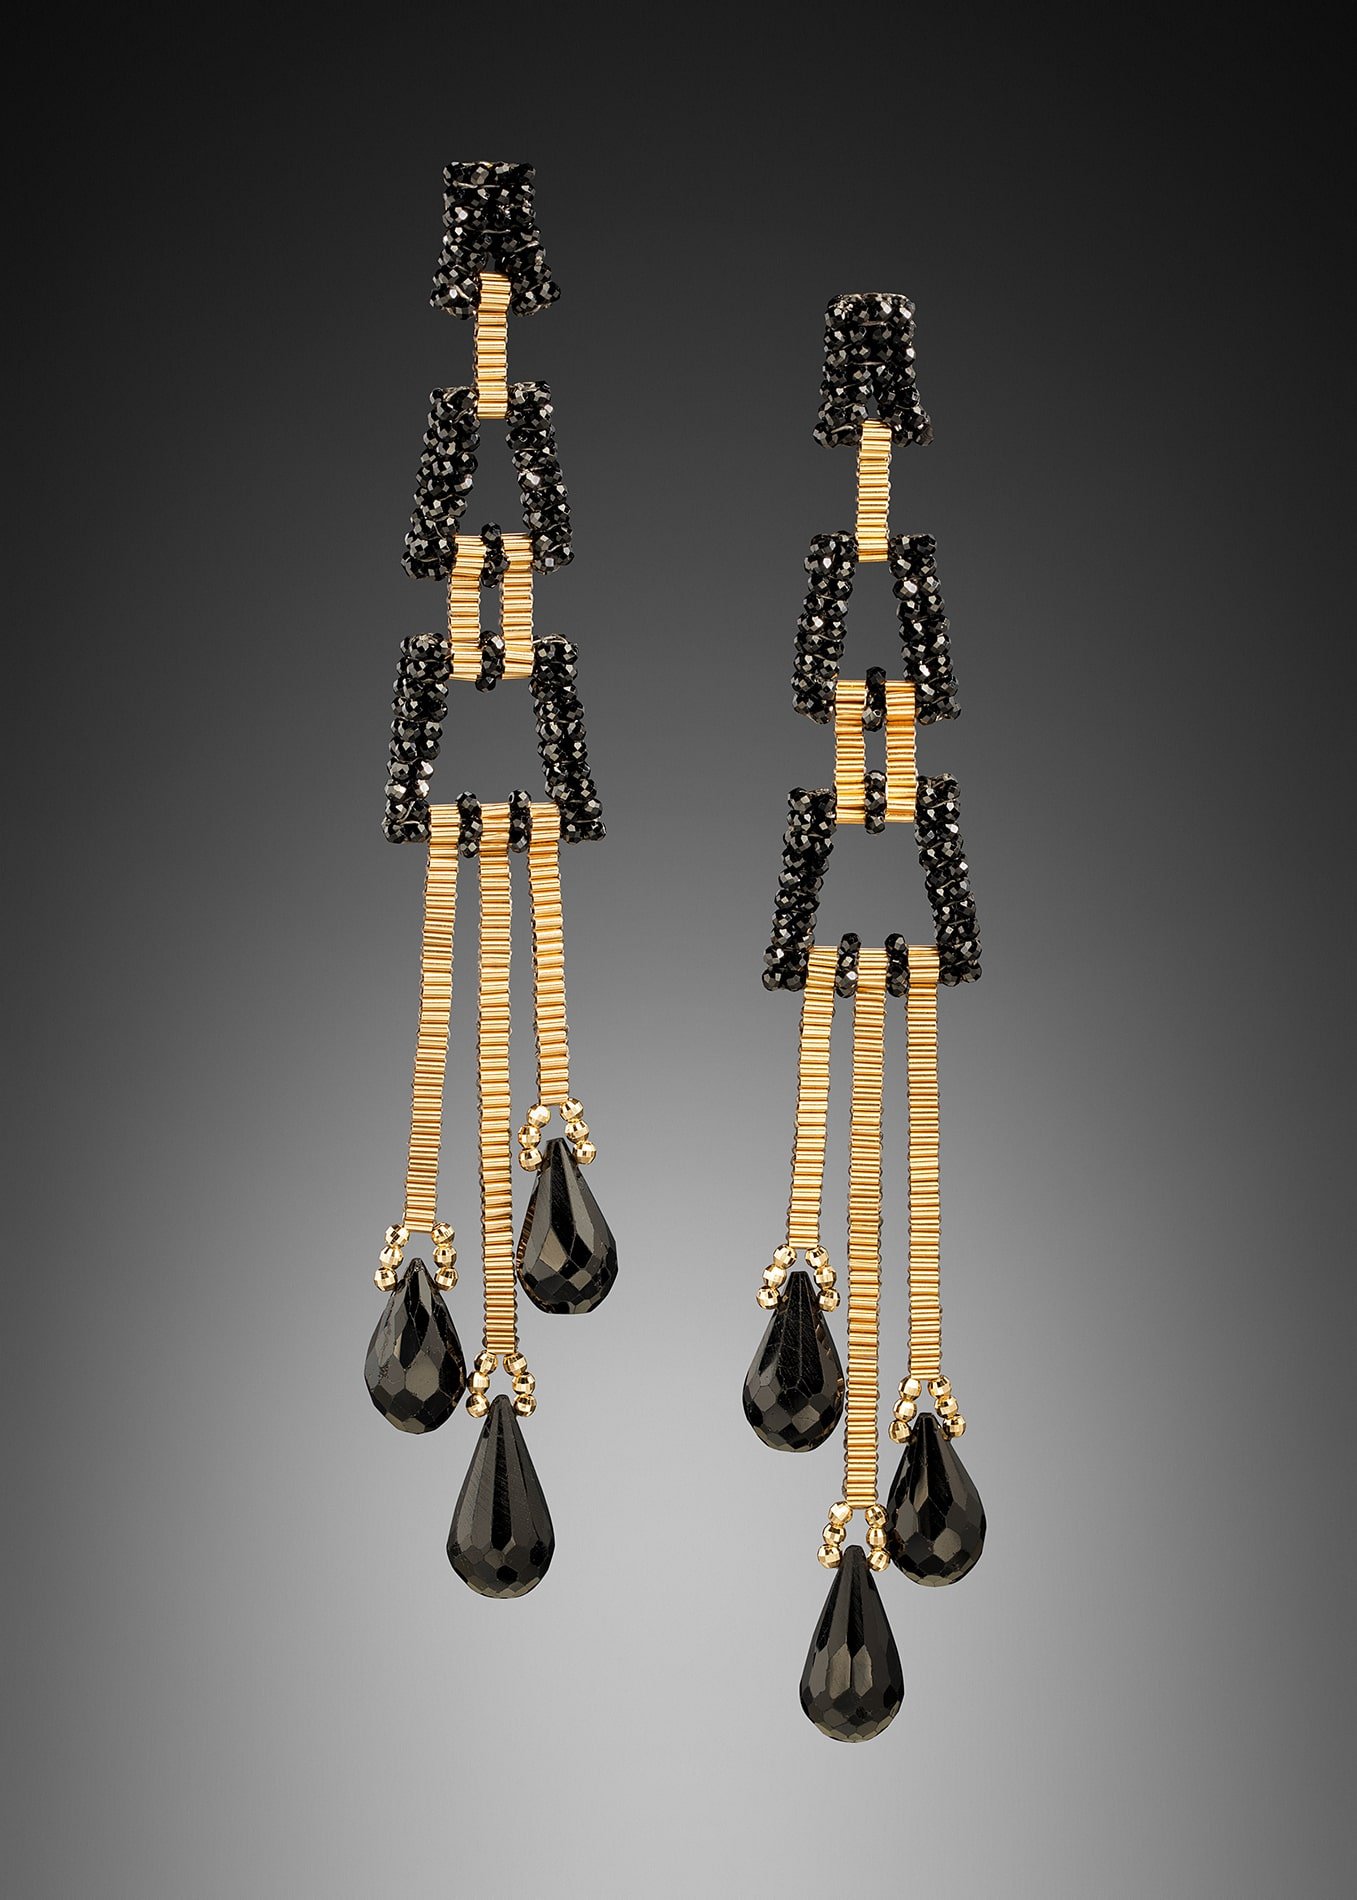 Deco Dusters.  These earrings are hand woven with 14k and black spinel beads.  They are designed to “dust” the shoulders.